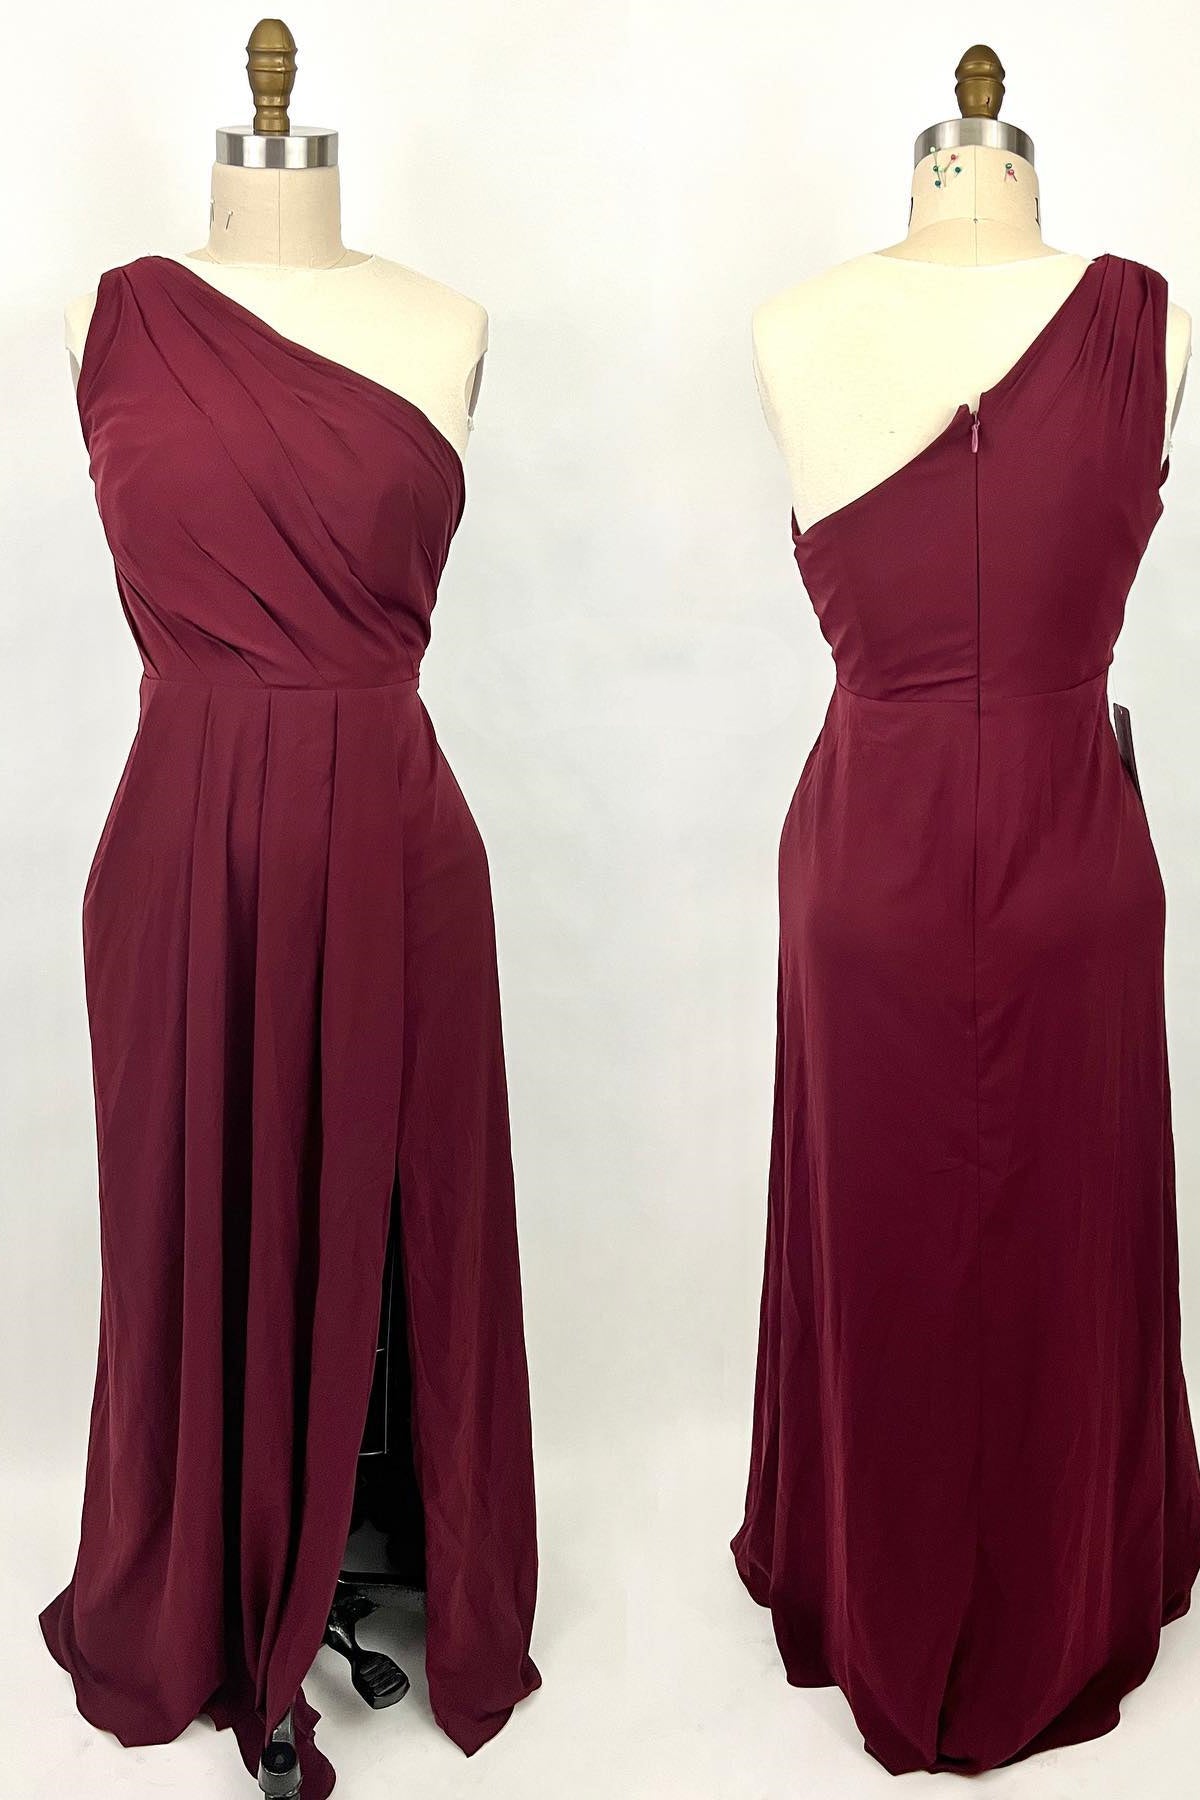 Cocktail Dress, Ruched Wine Red One Shoulder A-line Long Bridesmaid Dress